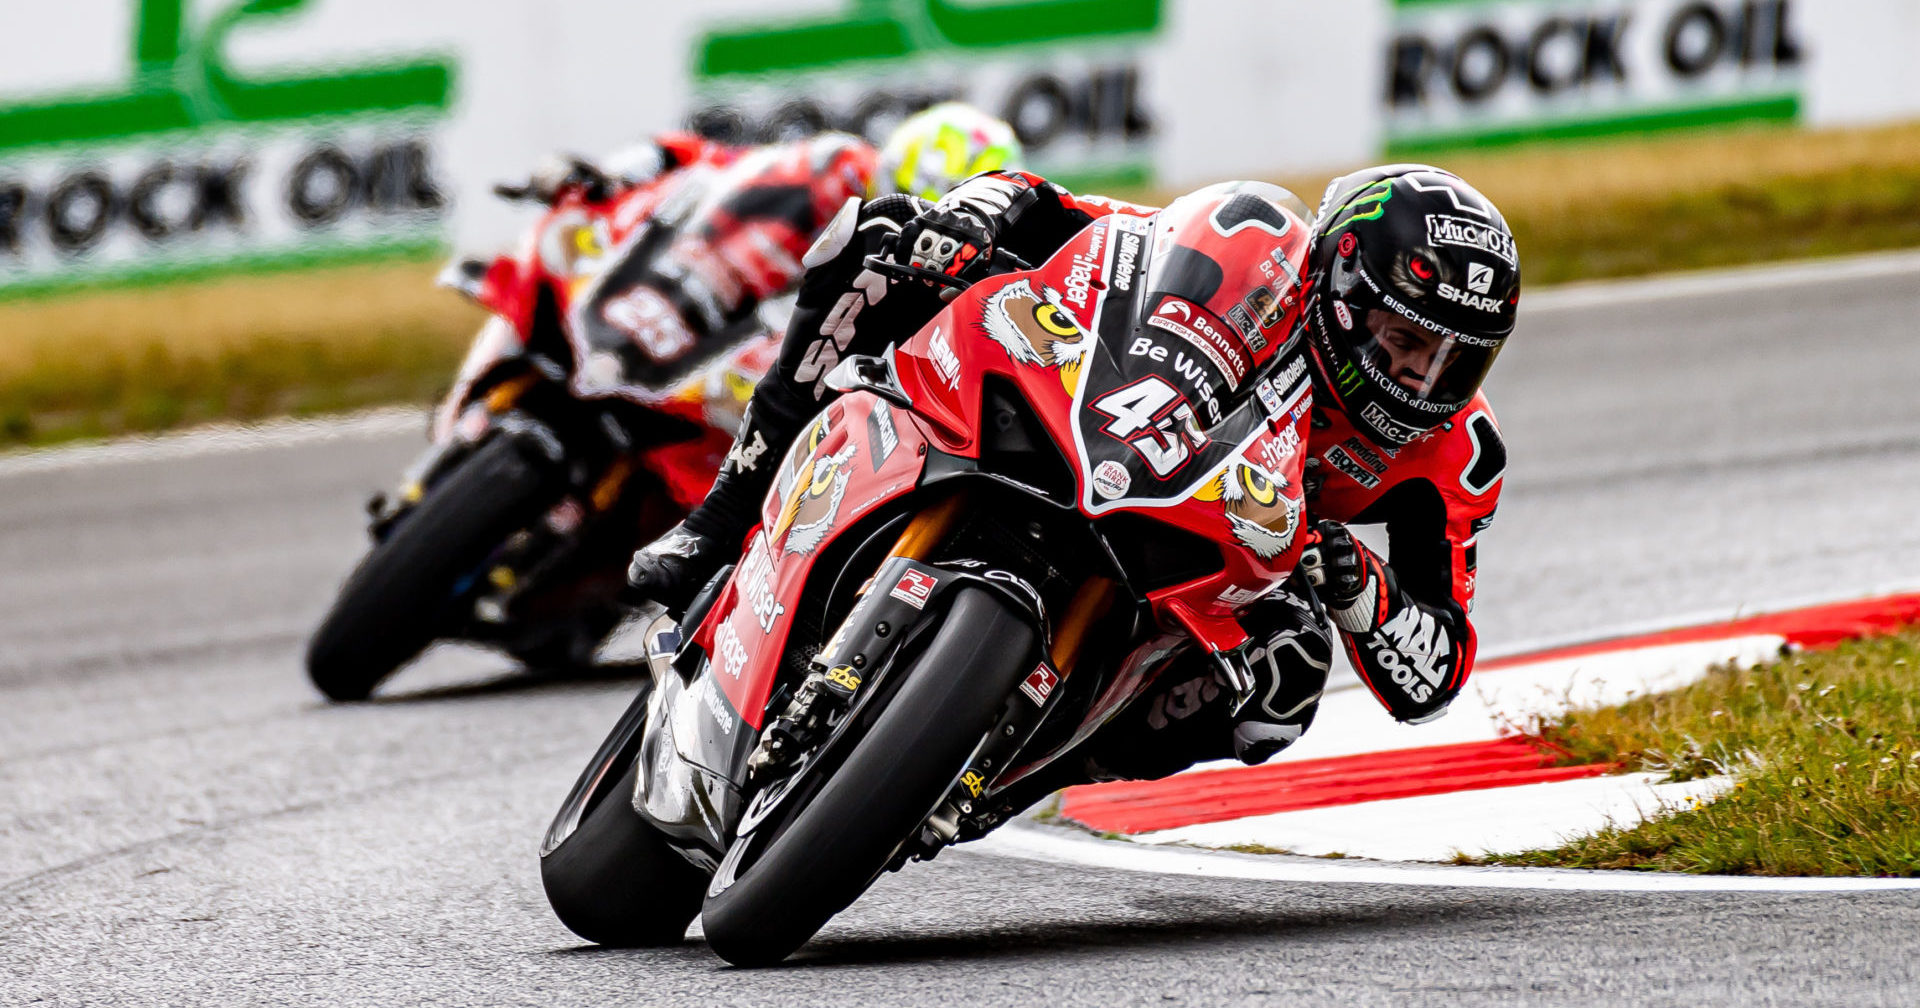 Teammates Scott Redding (45) and Josh Brookes (25) head into the finale of the 2019 British Superbike Championship first and second, respectively, in the point standings. Photo by Barry Clay.